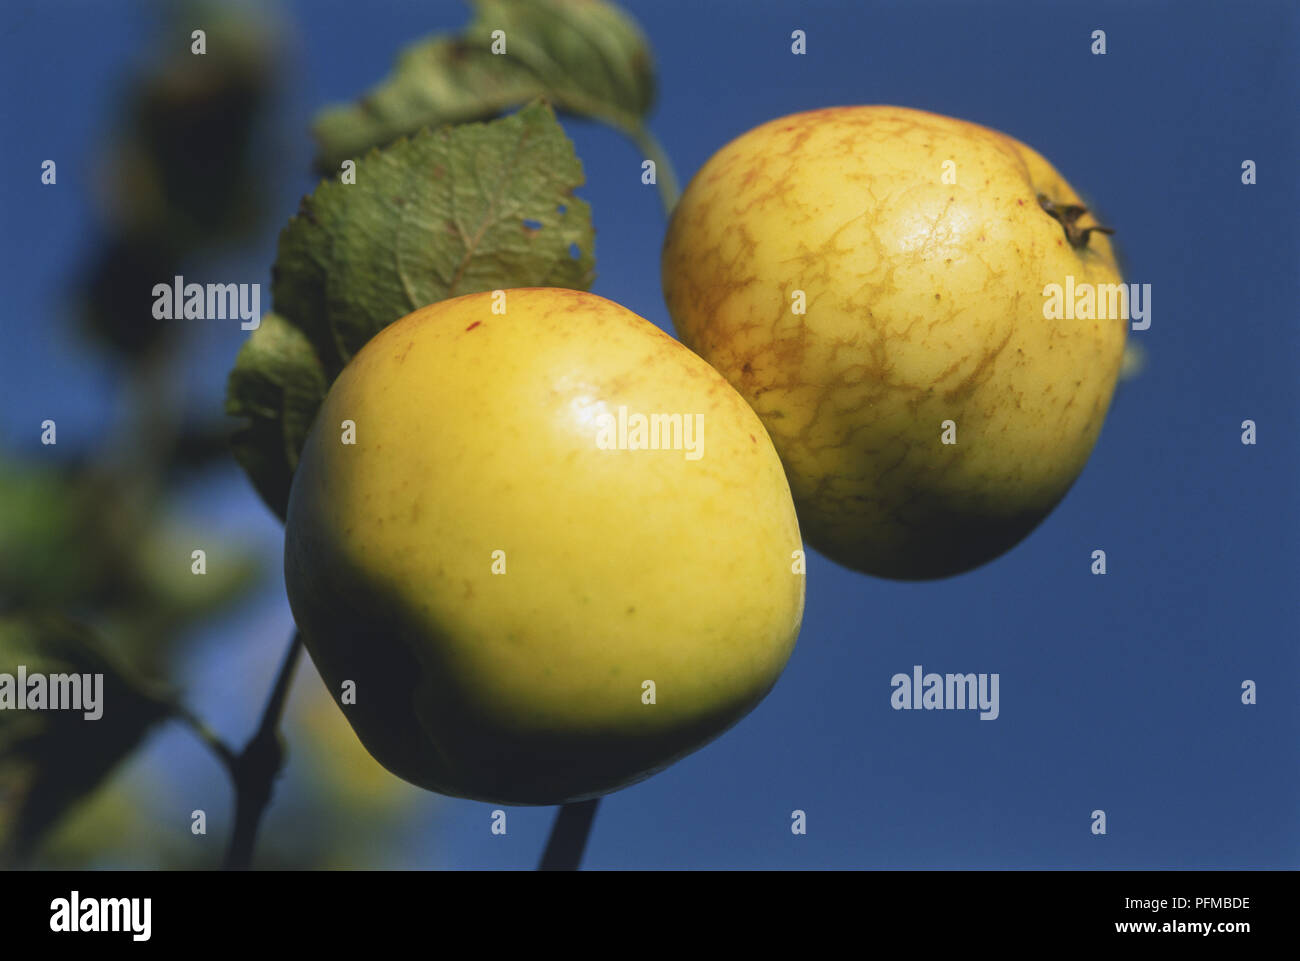 Malus domestica, two golden 'Orleans Reinette' Apples growing on tree against blue sky, close up Stock Photo